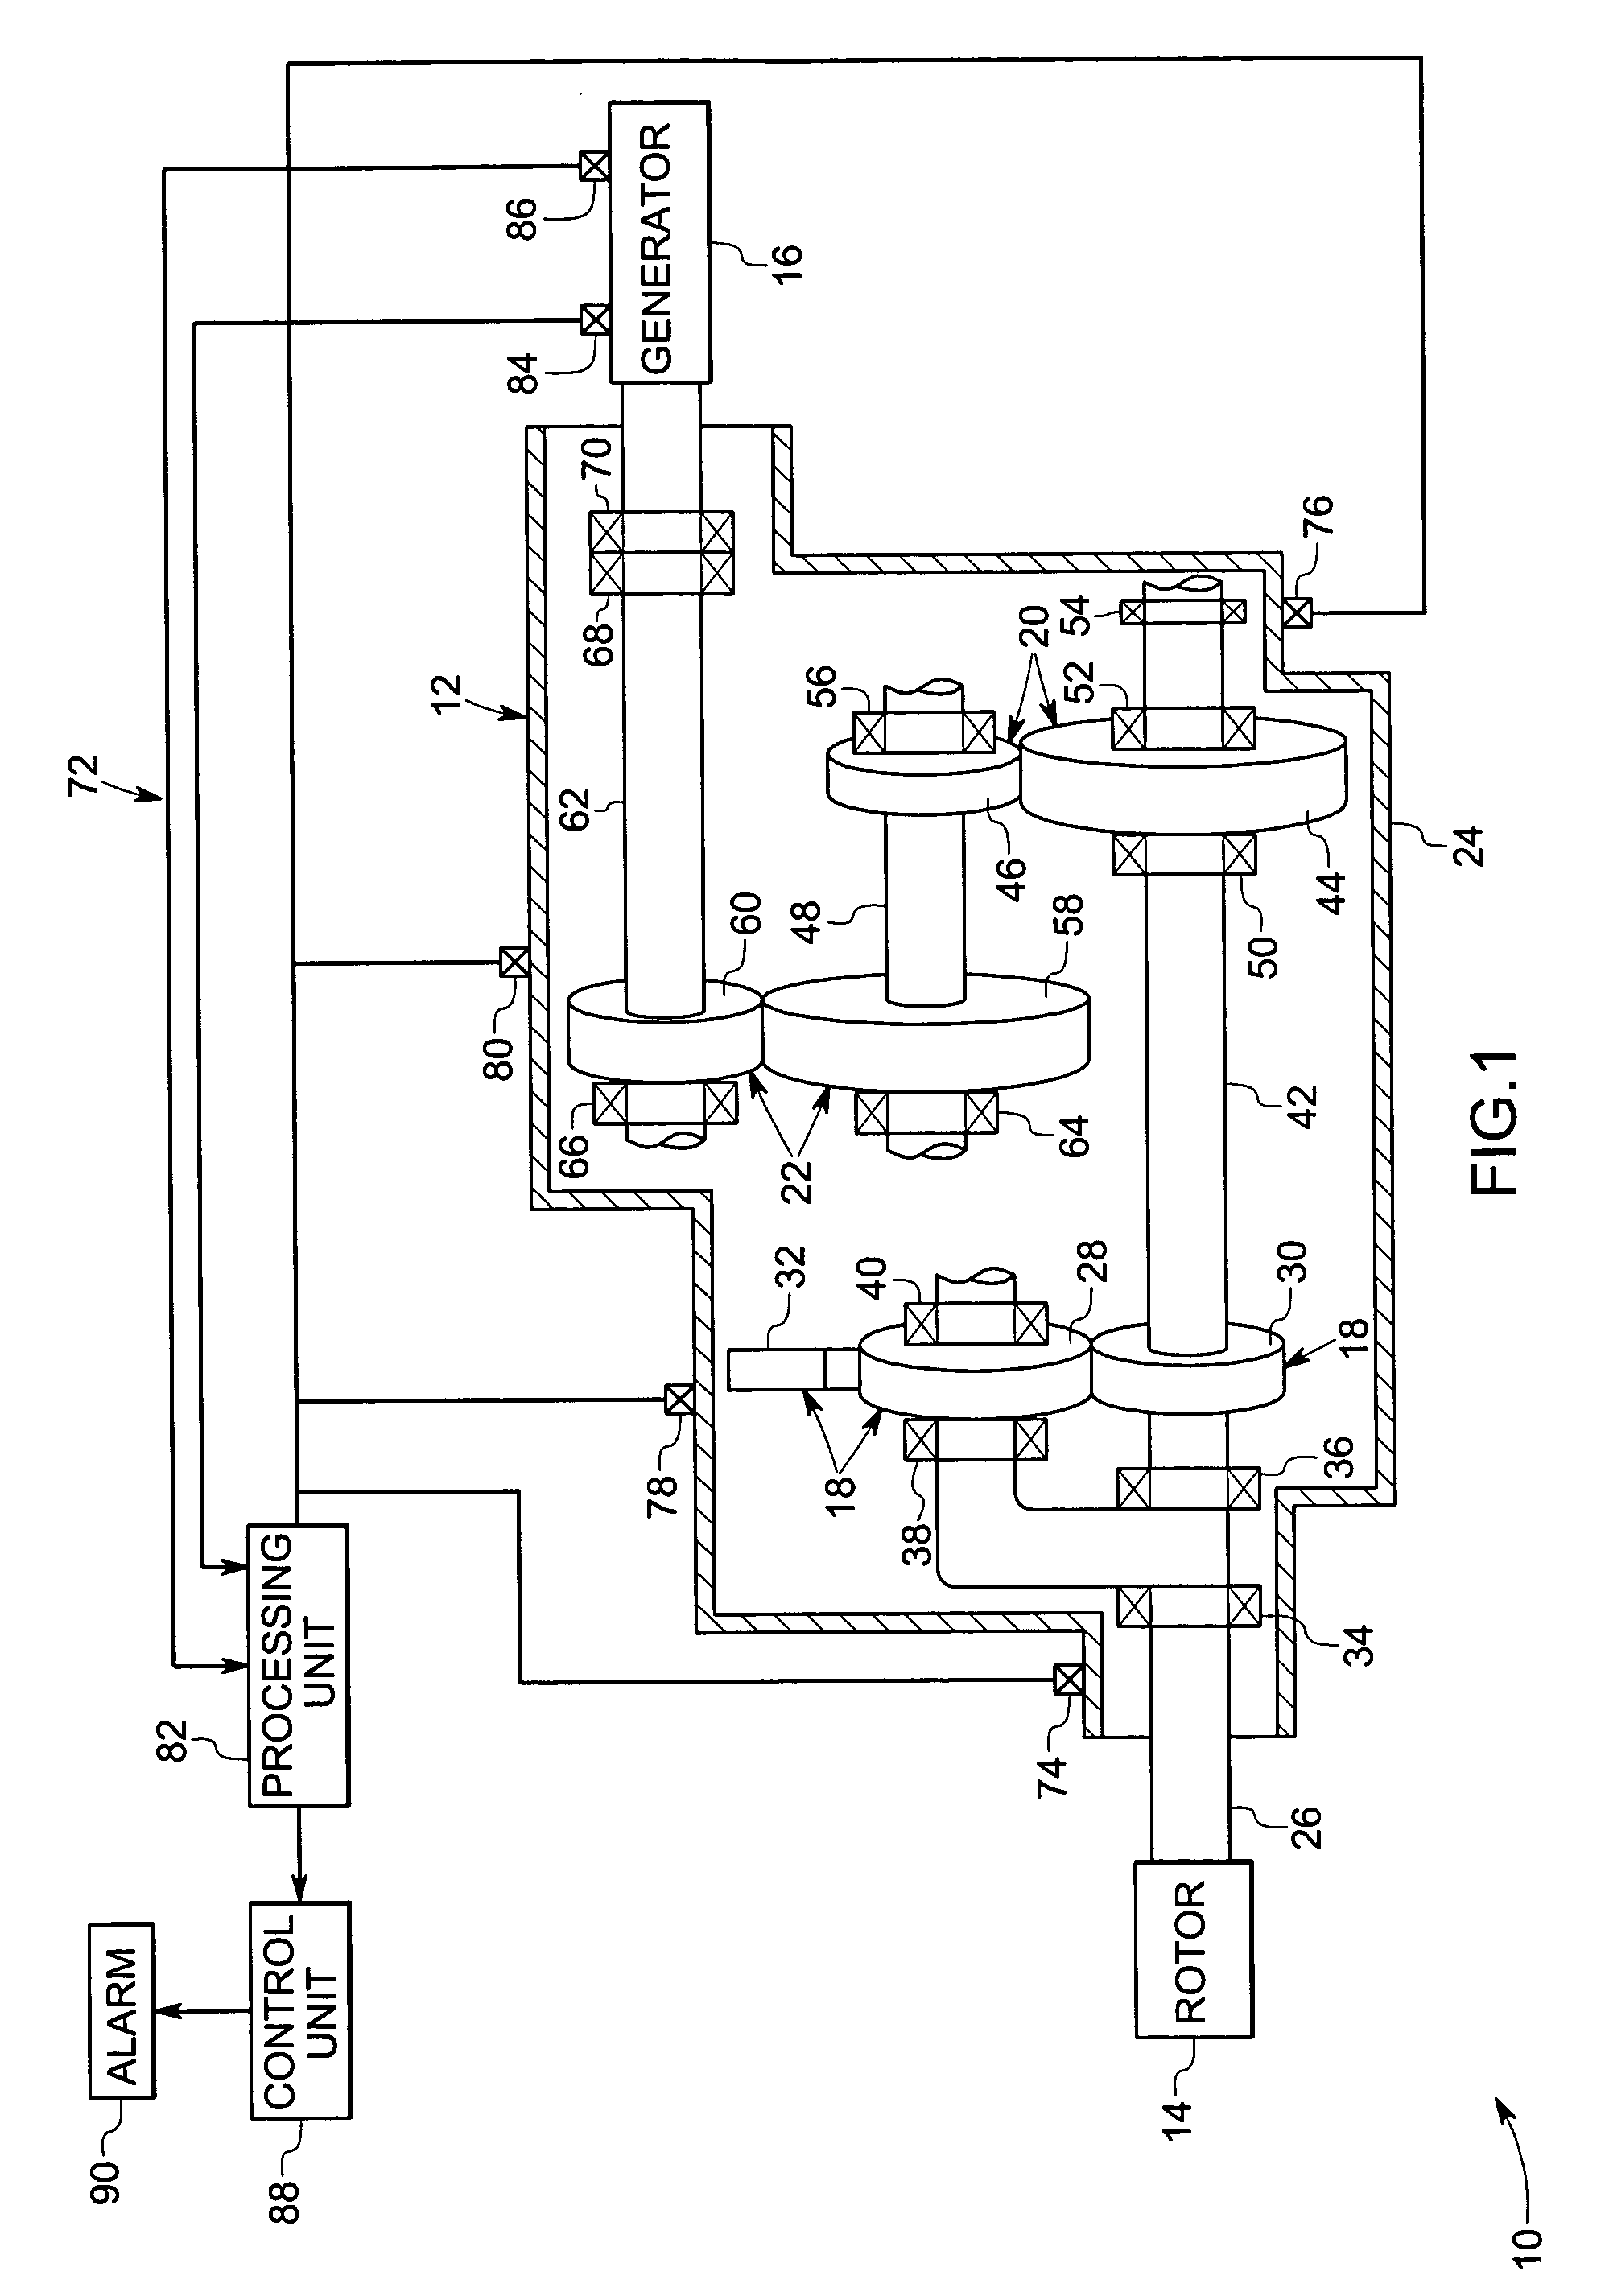 System and method for monitoring the condition of a drive train